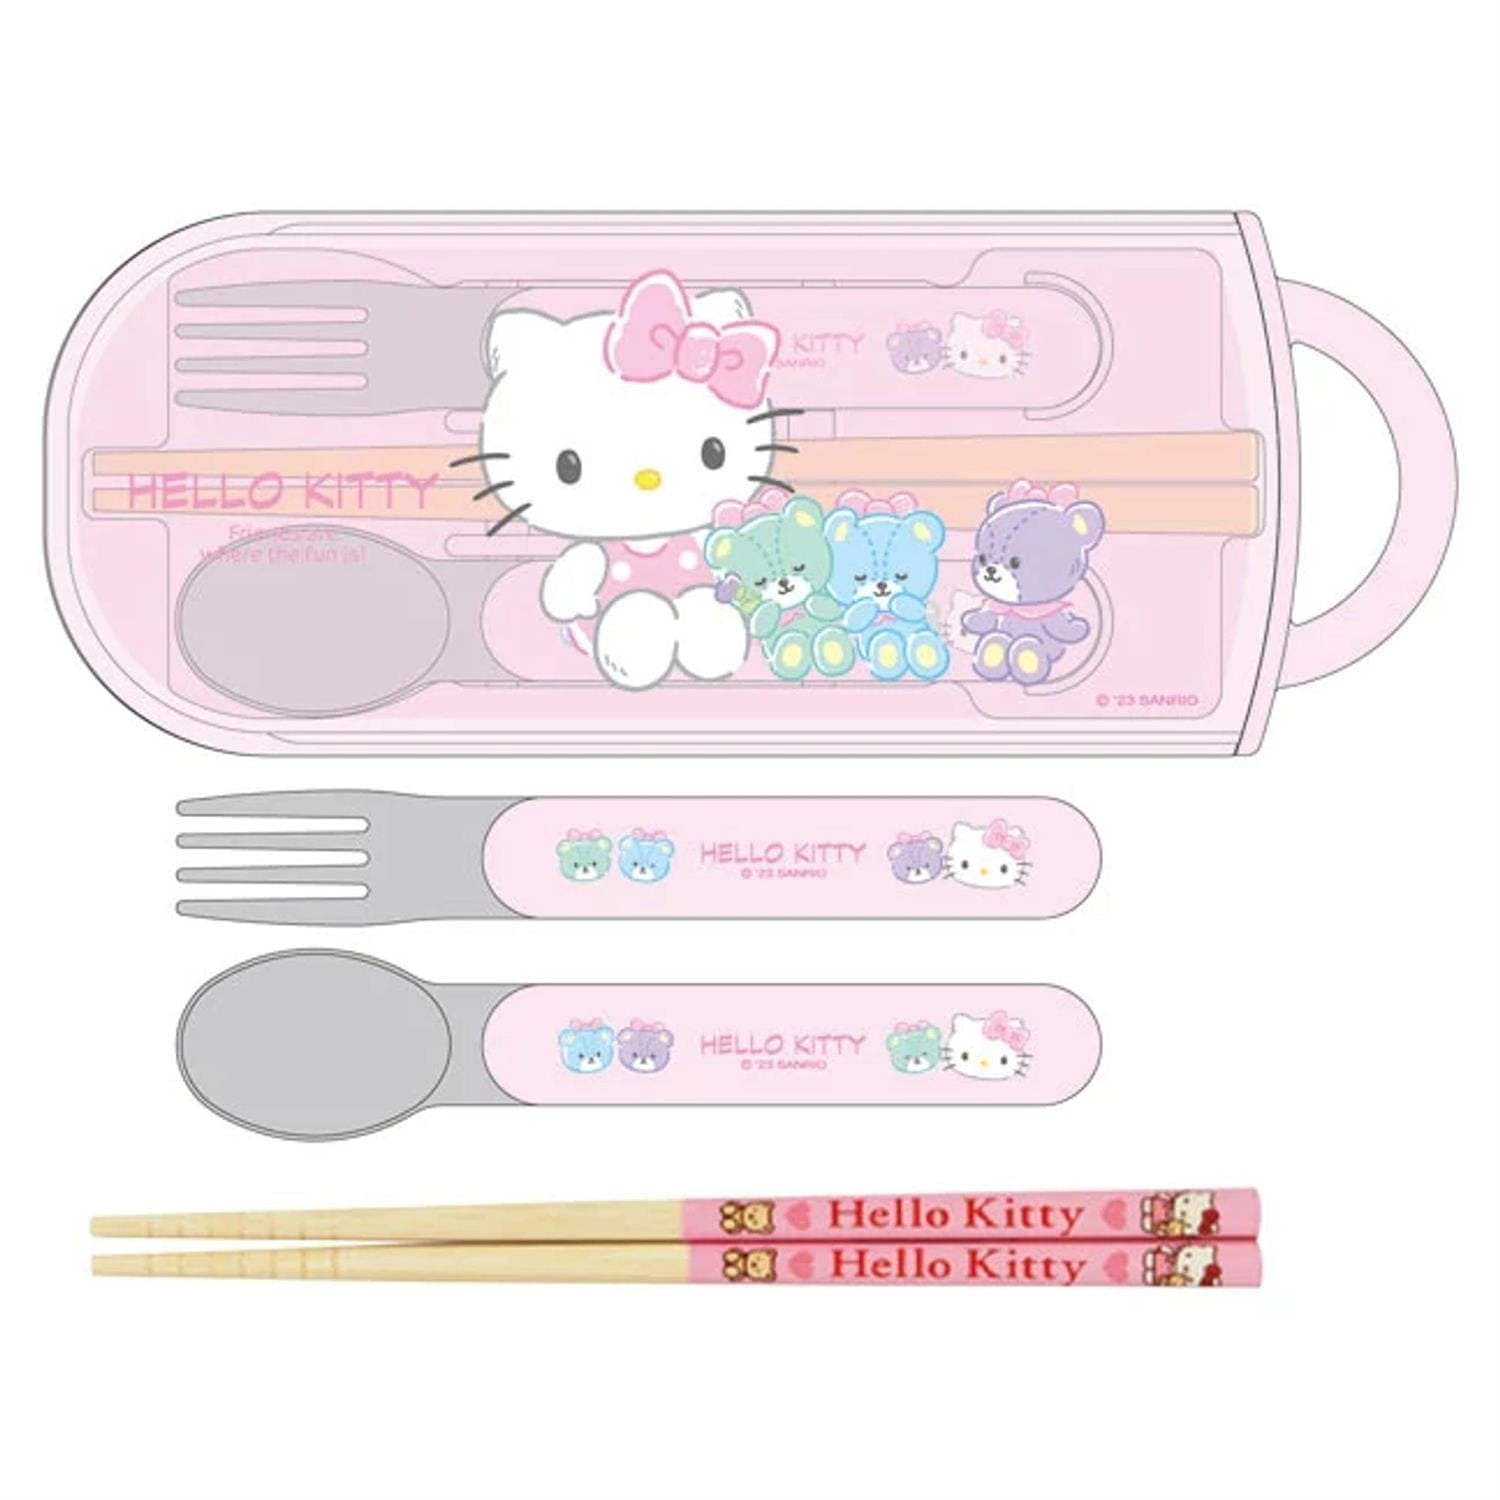 Hello Kitty and Bears Pastel Utensil Trio Set with Case